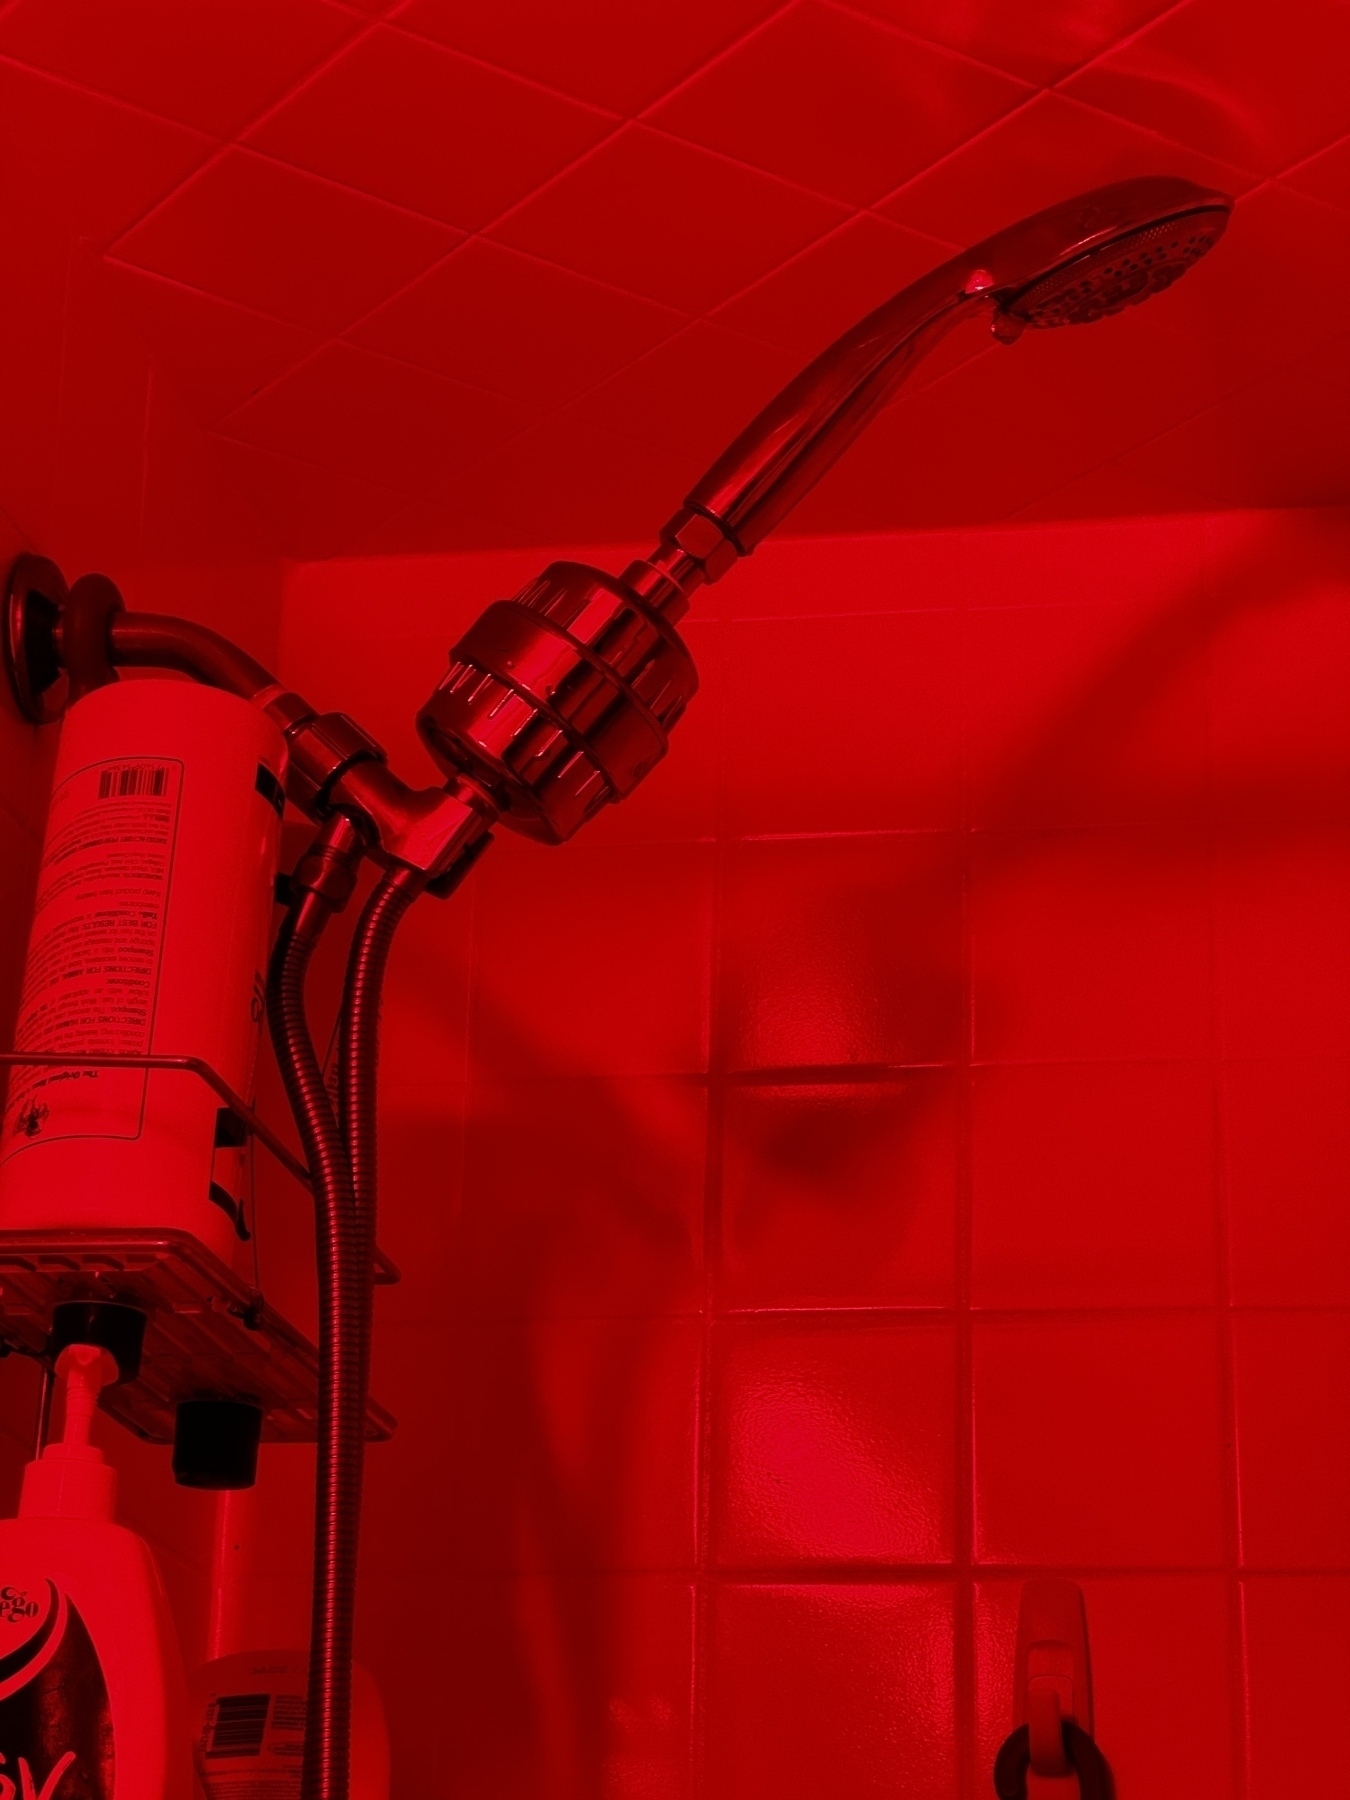  A shower head and water filter in a red lit shower.